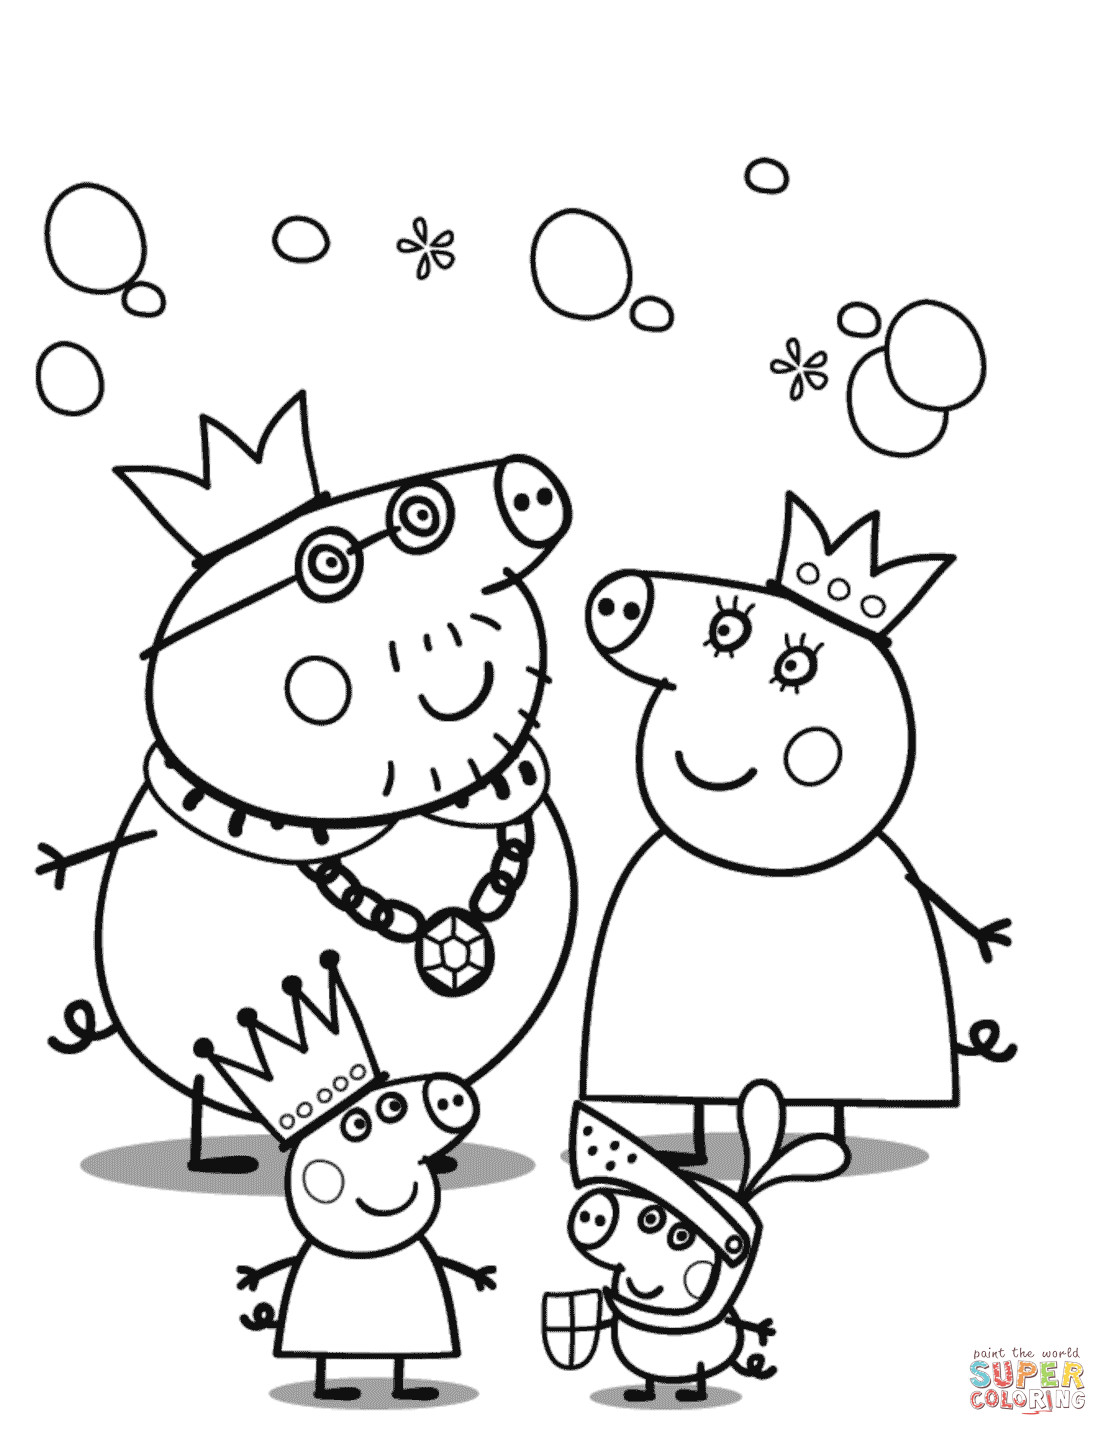 Coloring Pages For Boys Peppa Pig
 Peppa Pig s Royal Family coloring page